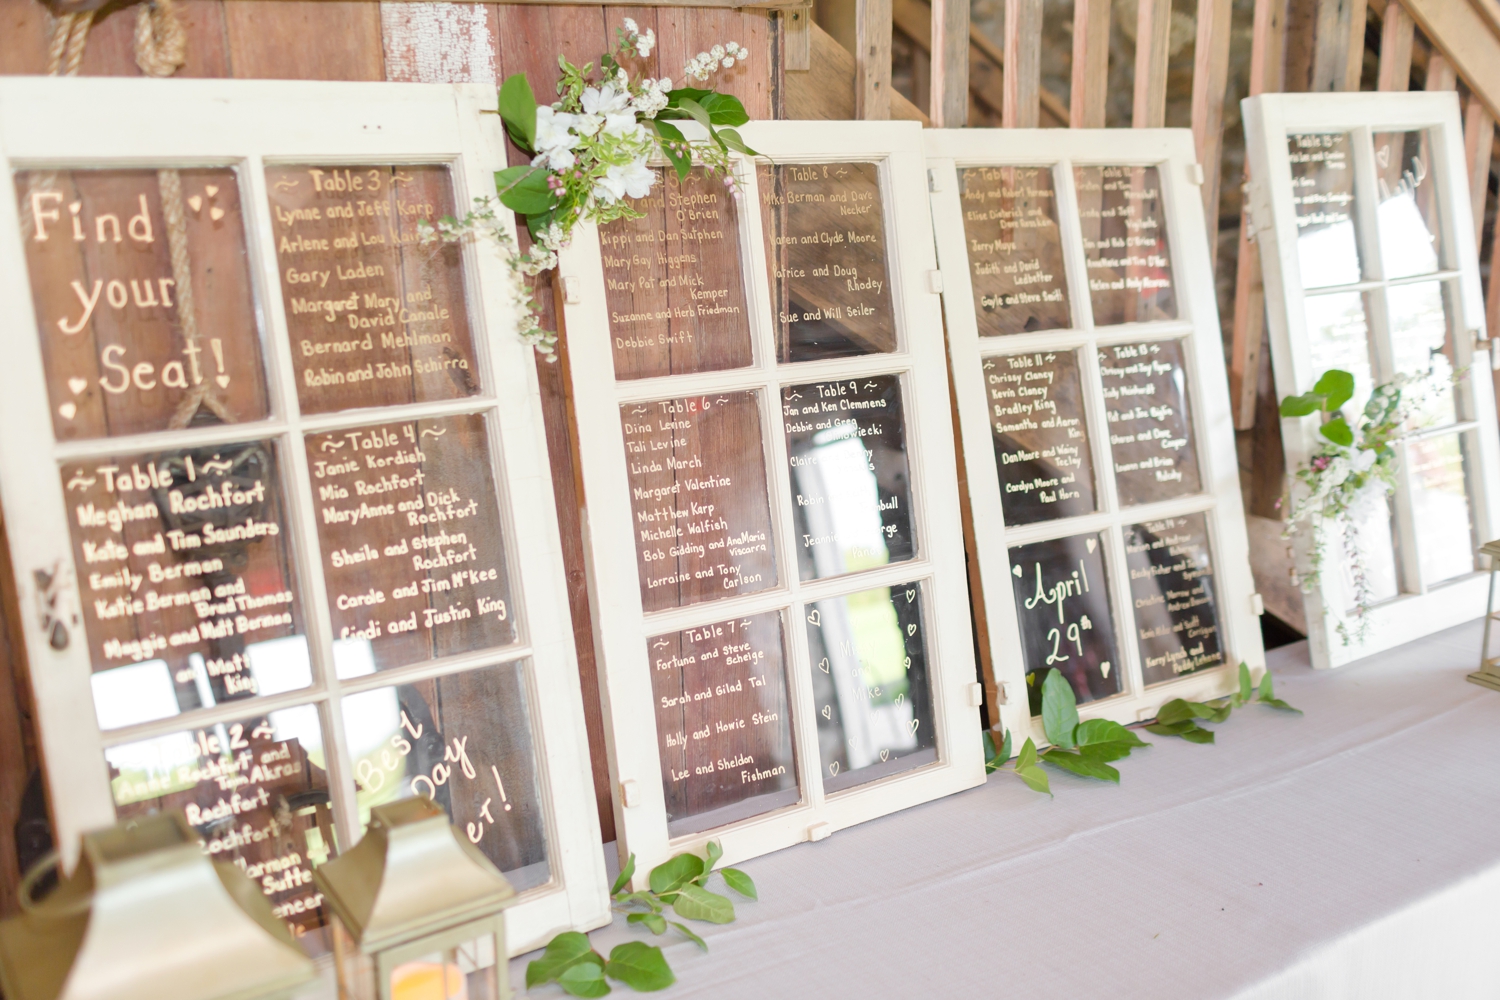  Such a cute idea for a seating chart! 